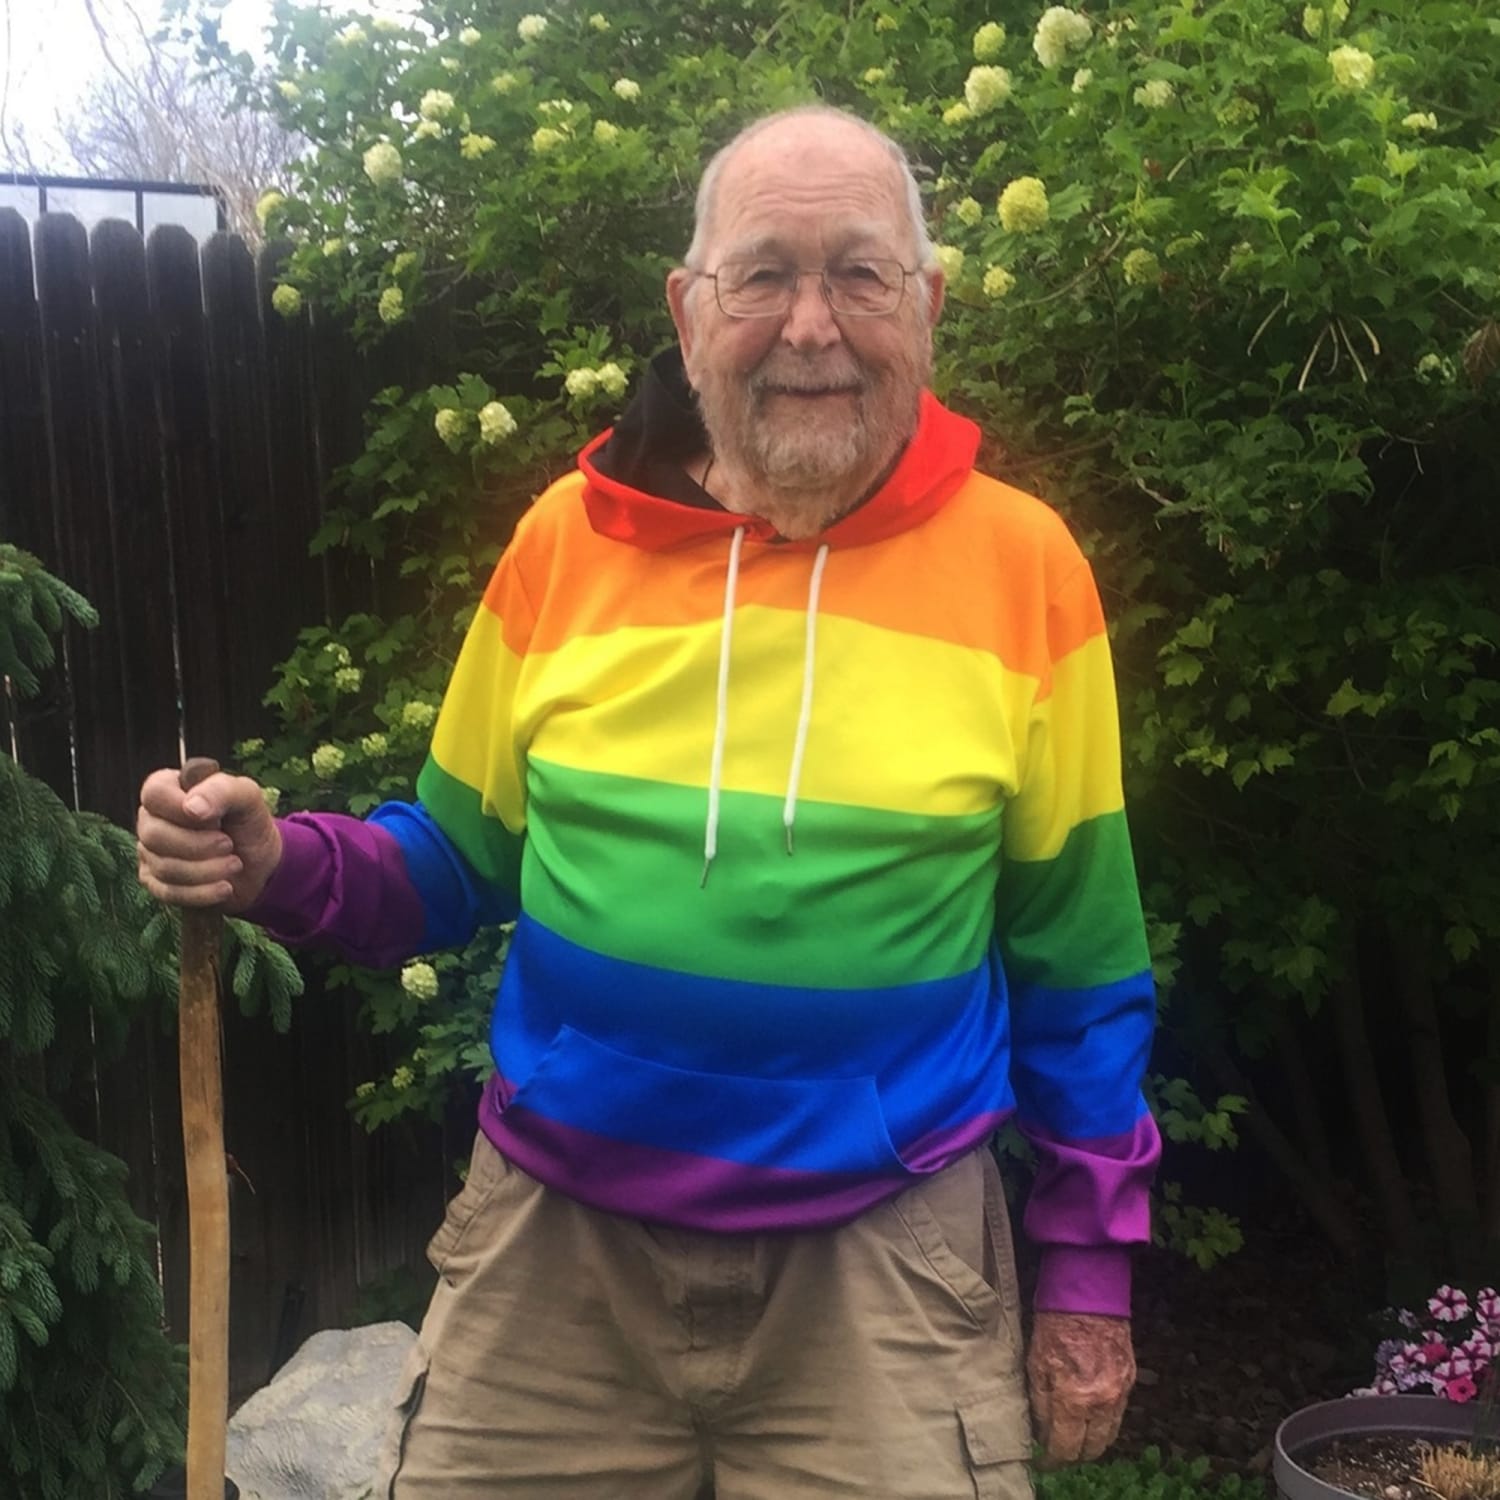 90-year-old grandfather Kenneth Felts comes out as image photo